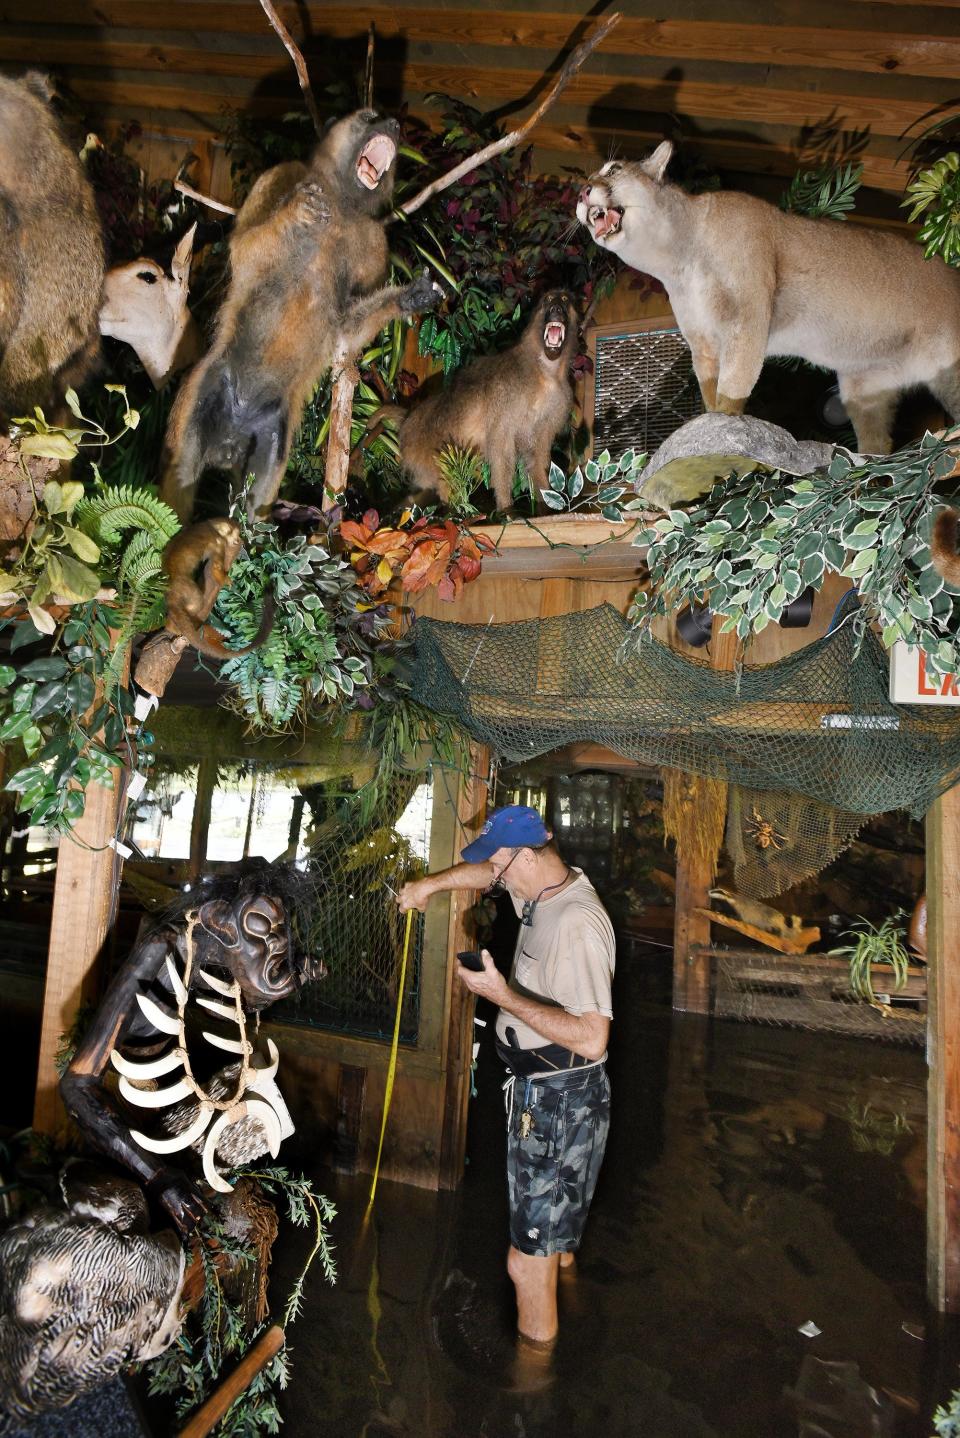 John Roush measures the waterline inside the taxidermy animal-filled dining room of Clark's Fish Camp in 2017 as he inspects the flooded restaurant for the first time since Hurricane Irma passed over the Jacksonville area.